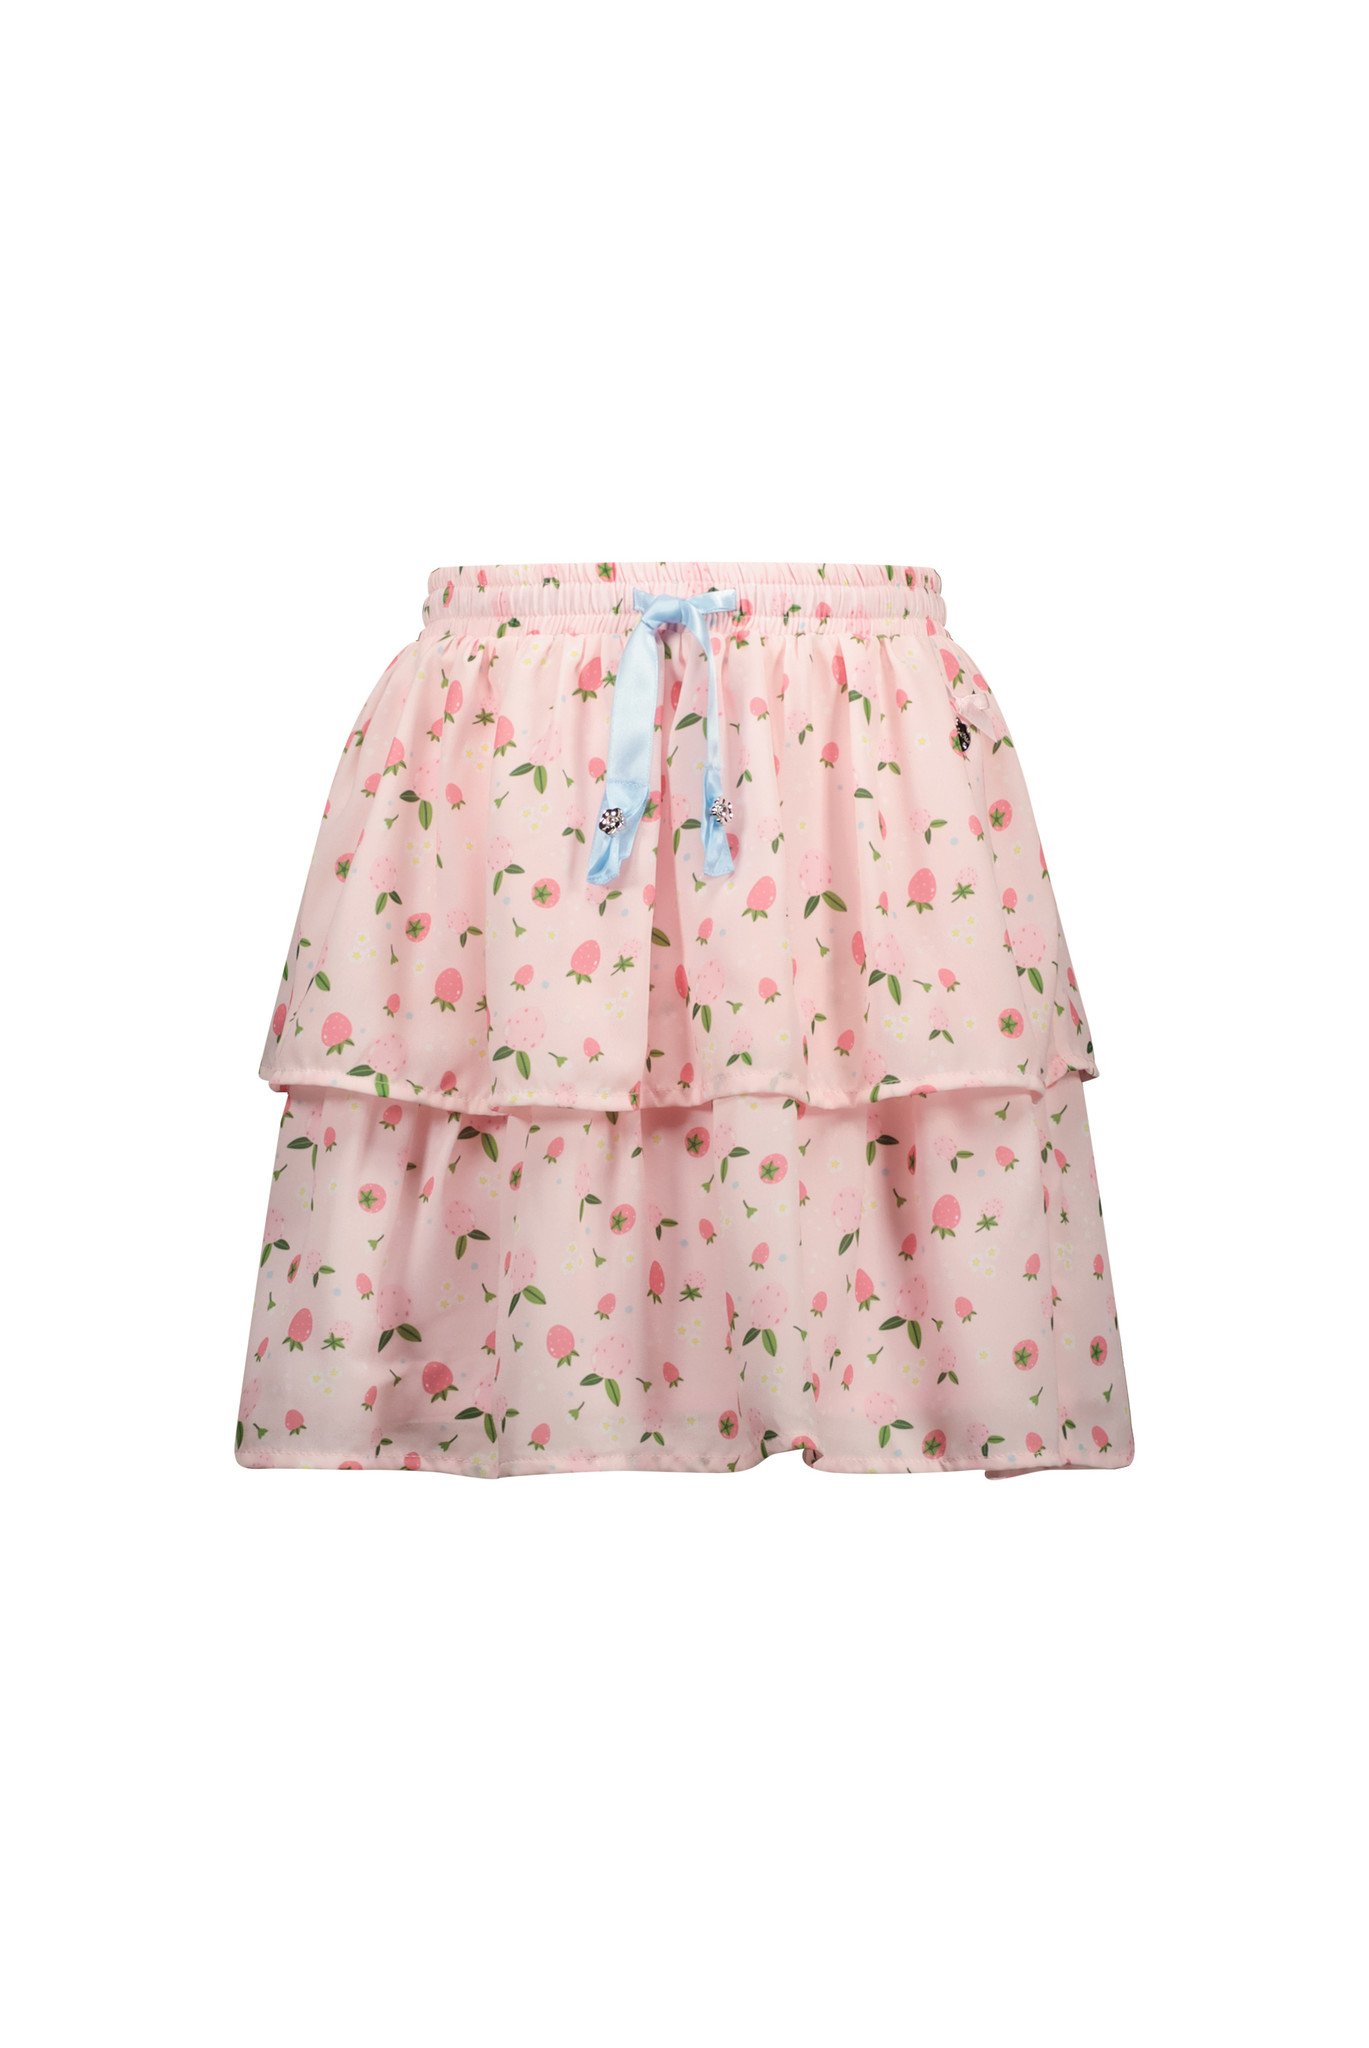 Le Chic Meisjes rok - Tina - Candy crush